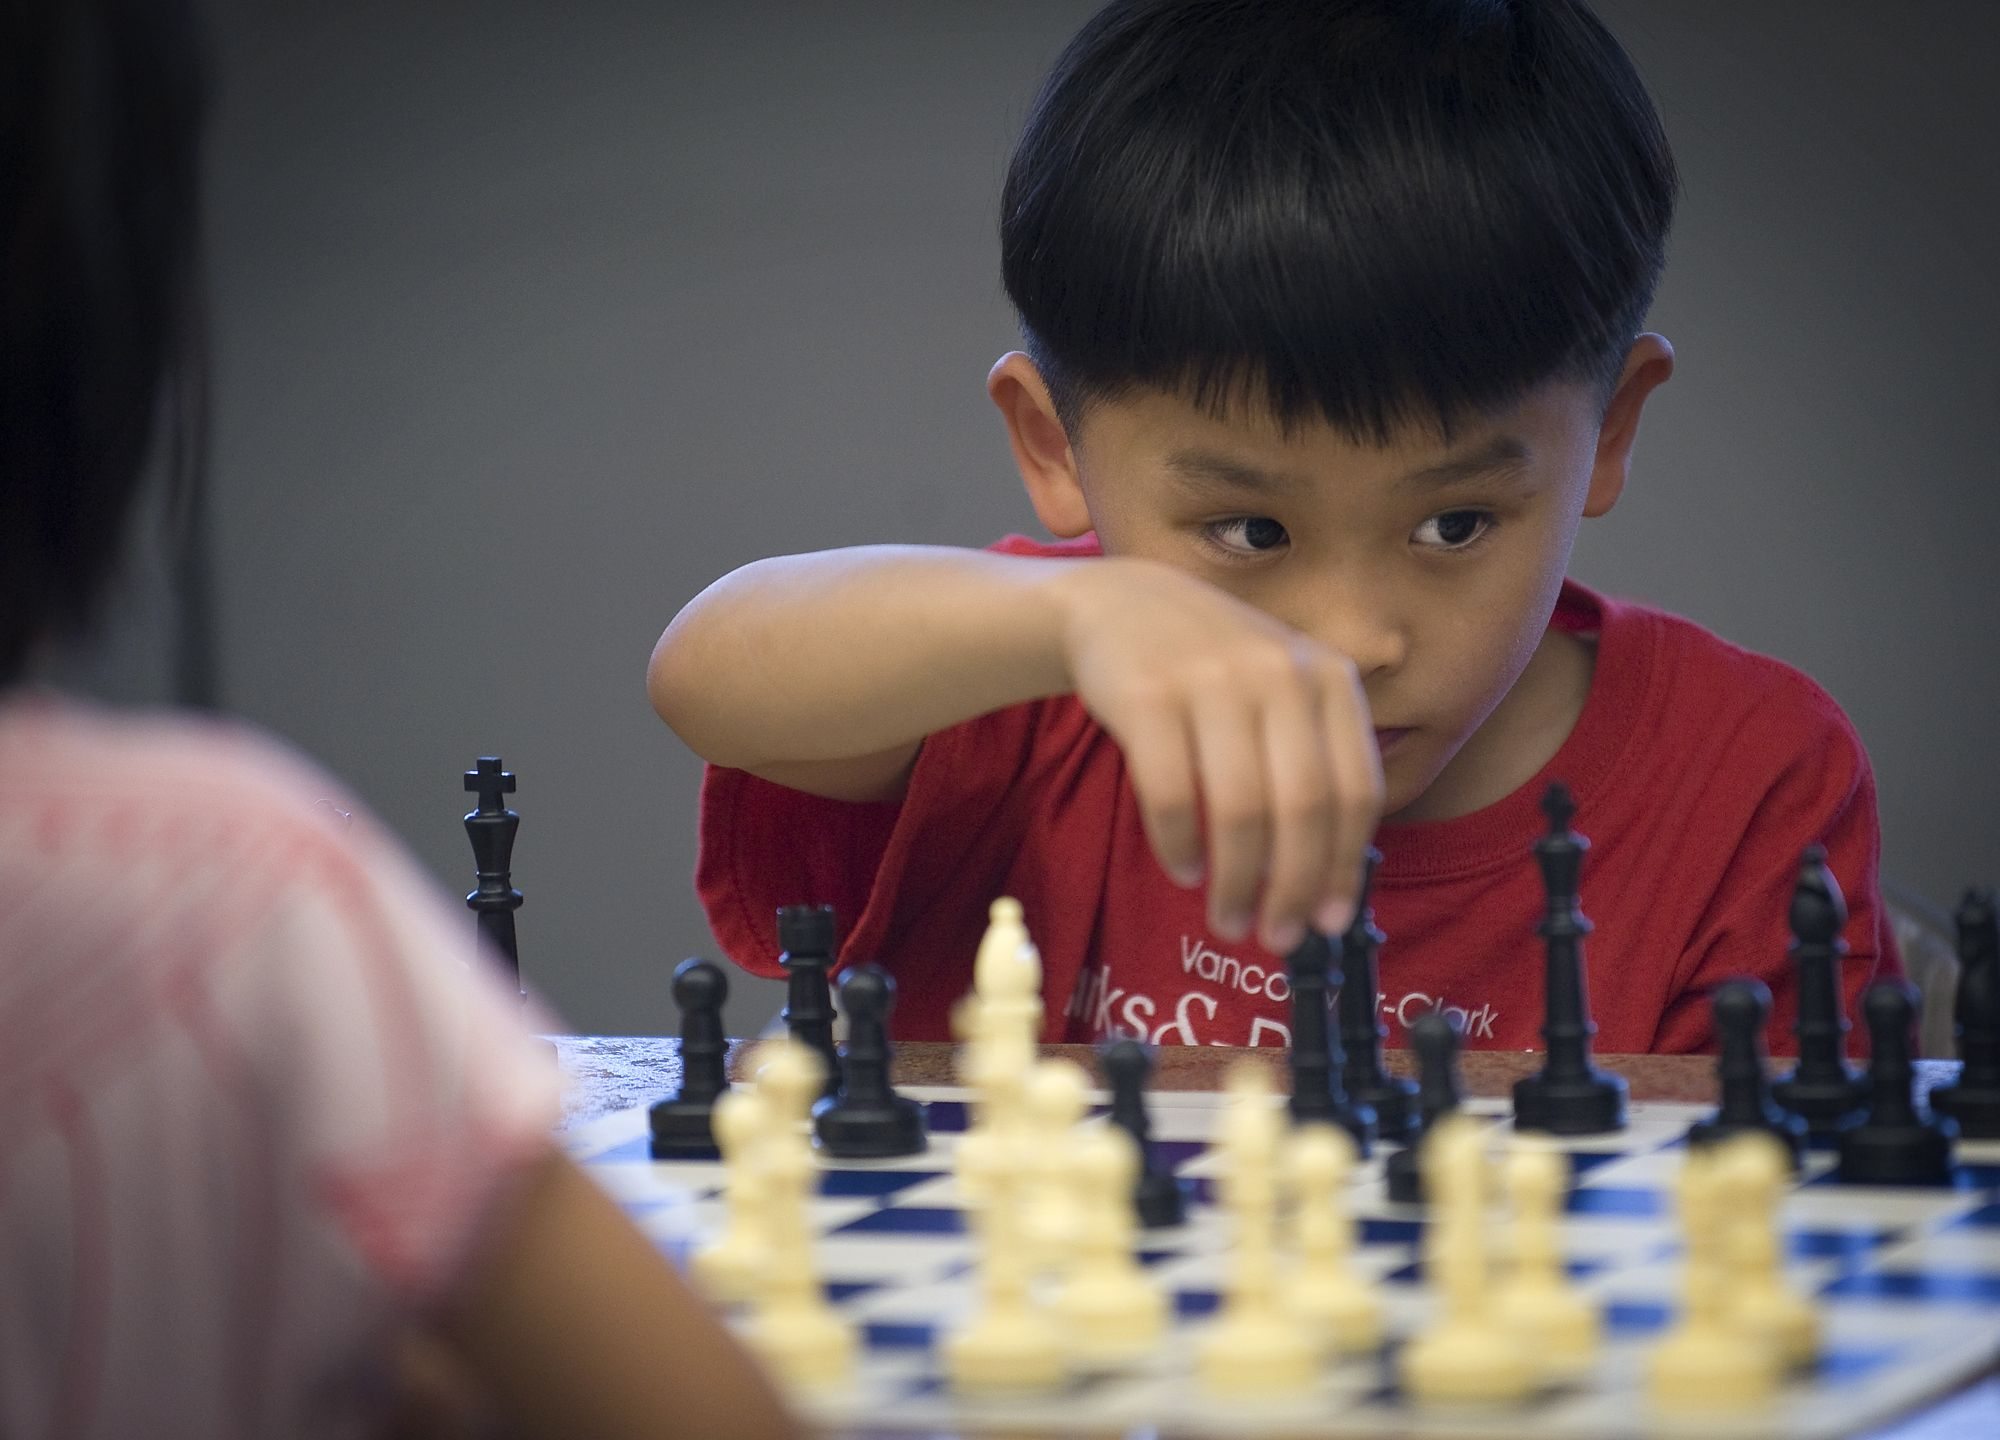 A young chess player contemplates a game plan or strategic